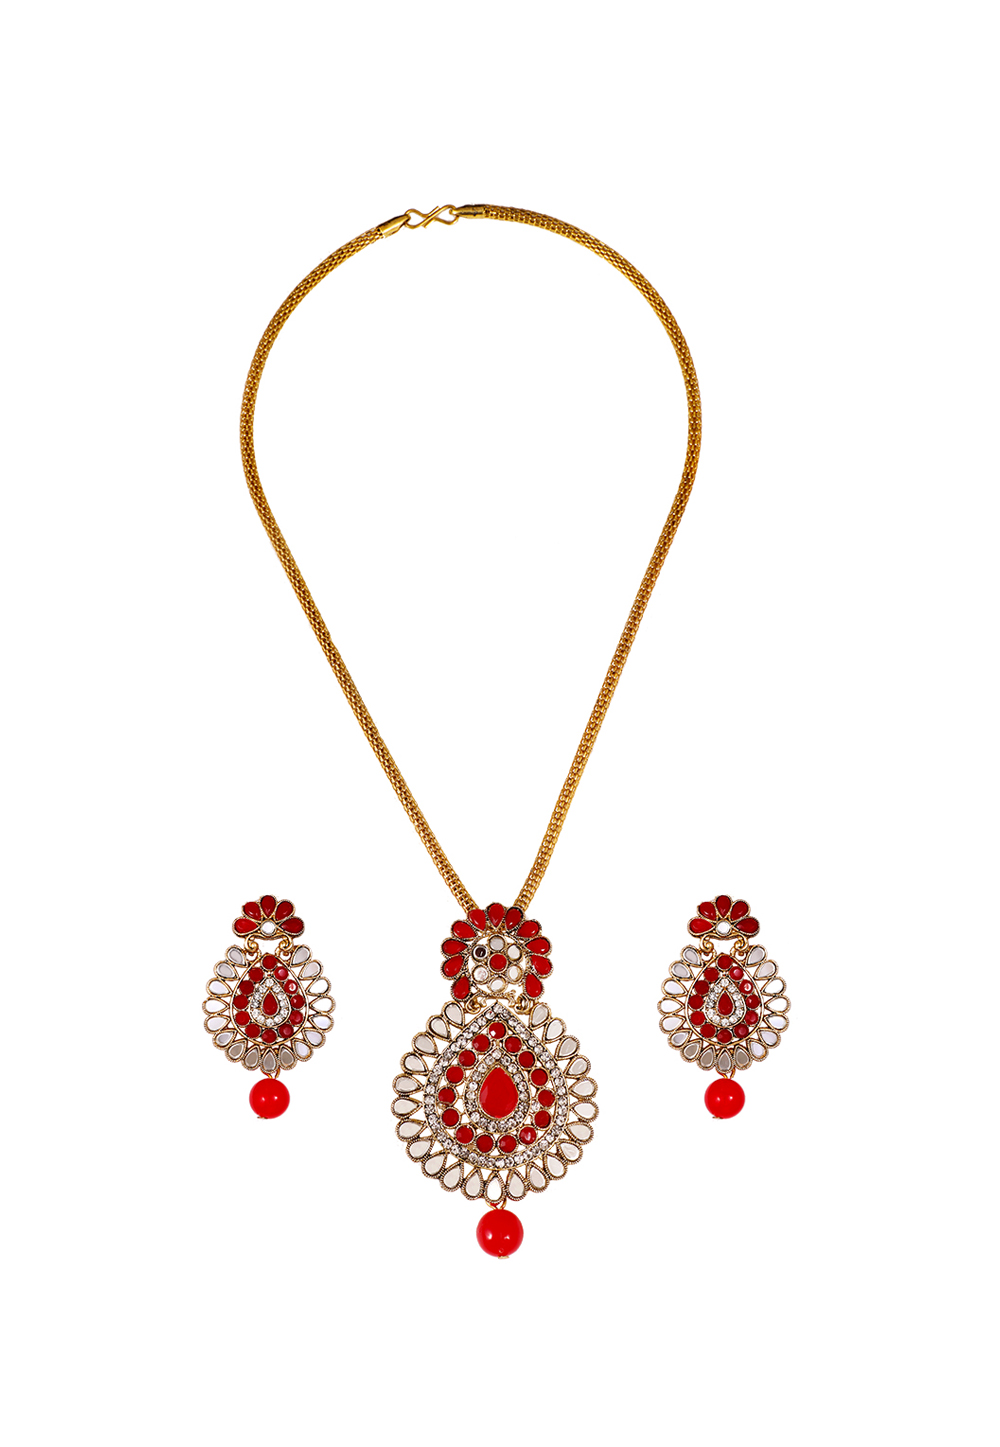 Red Alloy Artificial Stone Necklace Set Earrings 254197